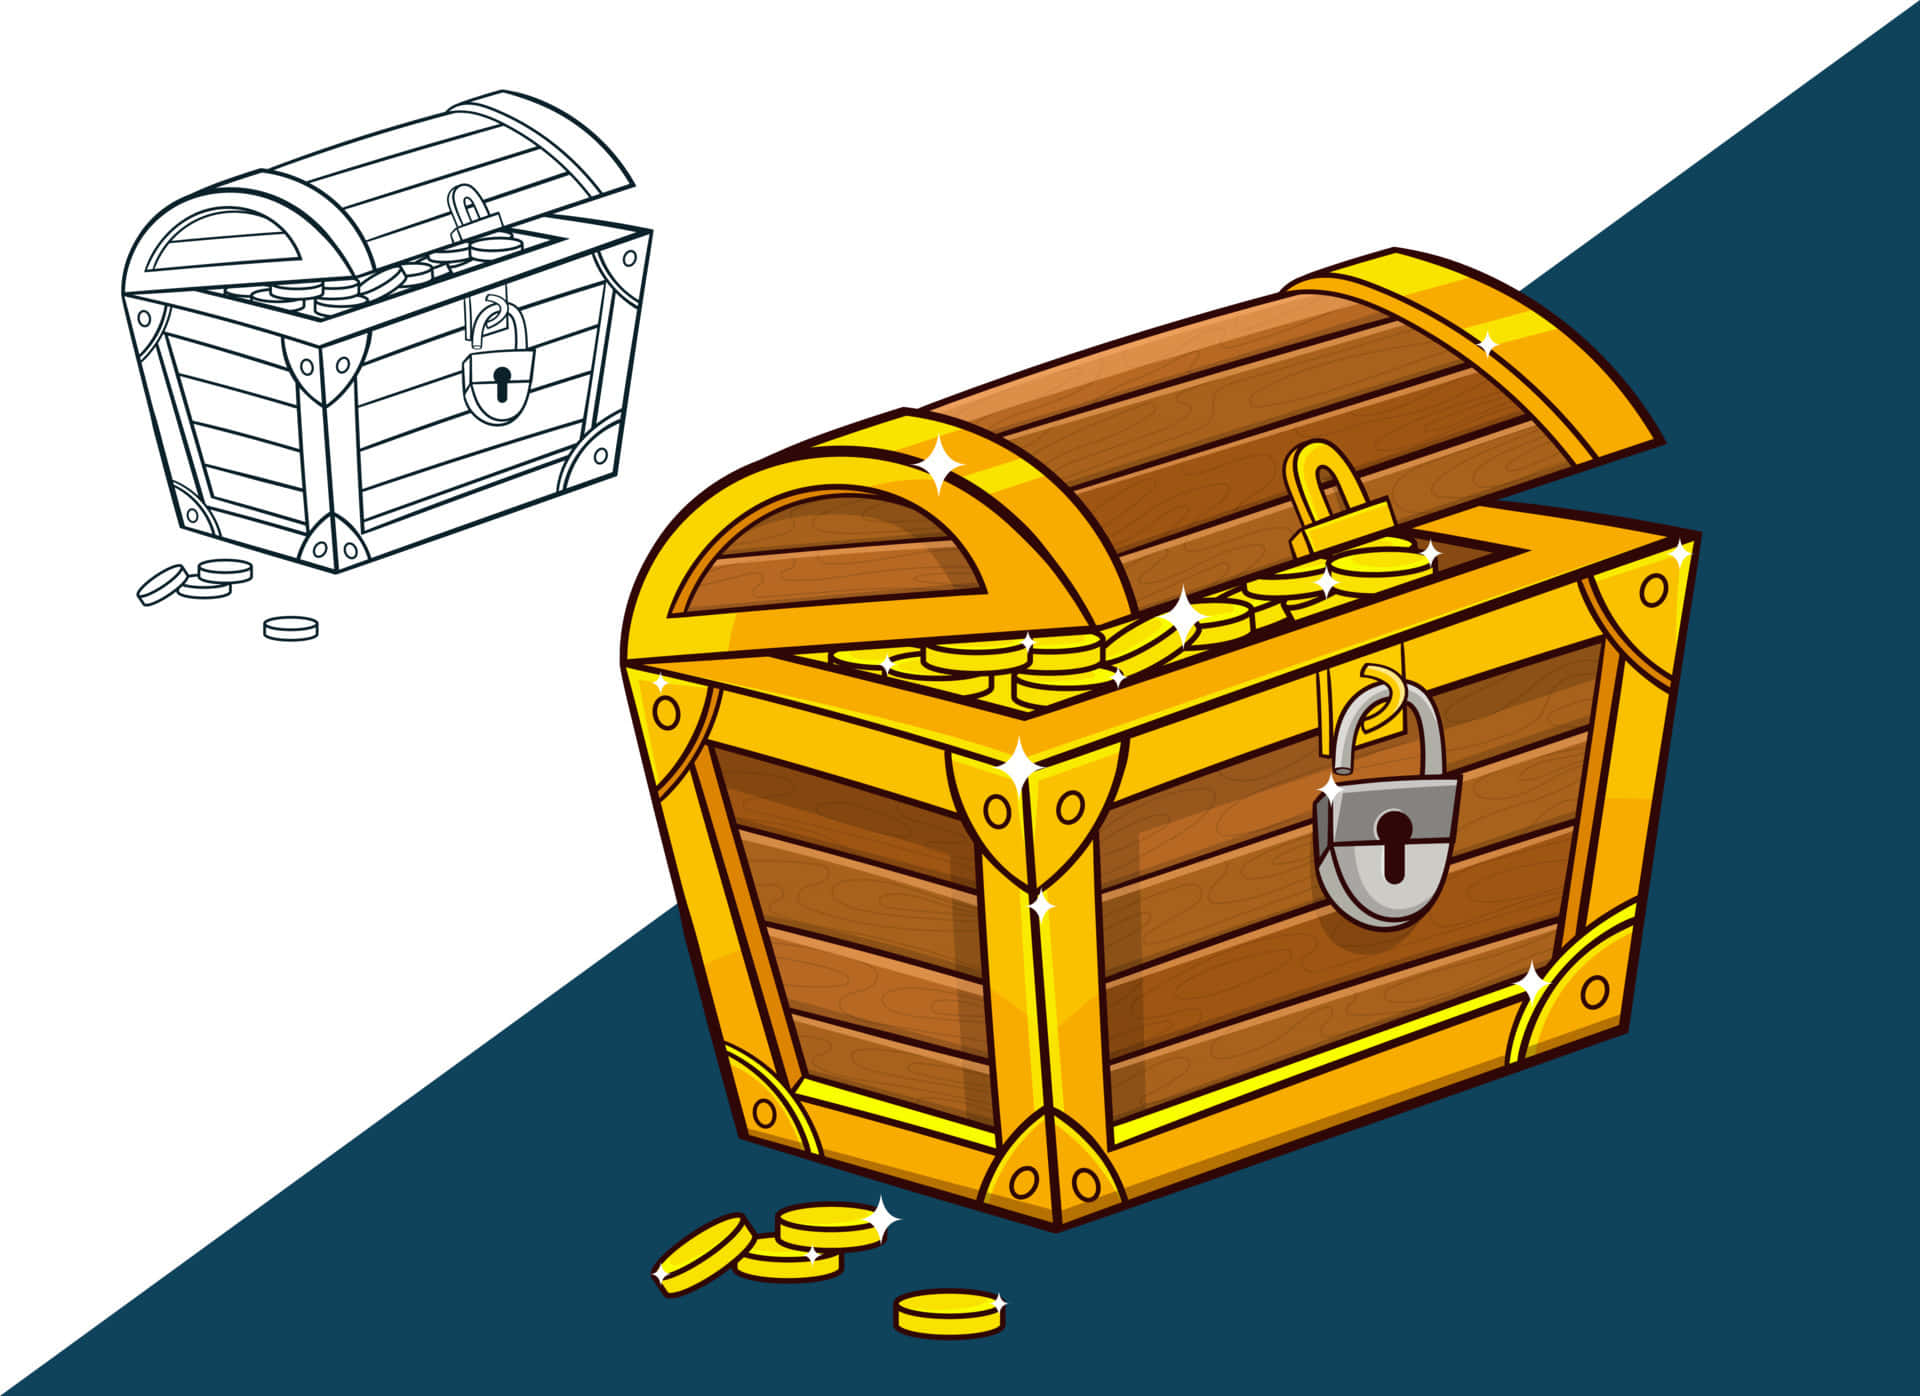 Premium Photo  Cartoon image of a treasure chest overflowing with